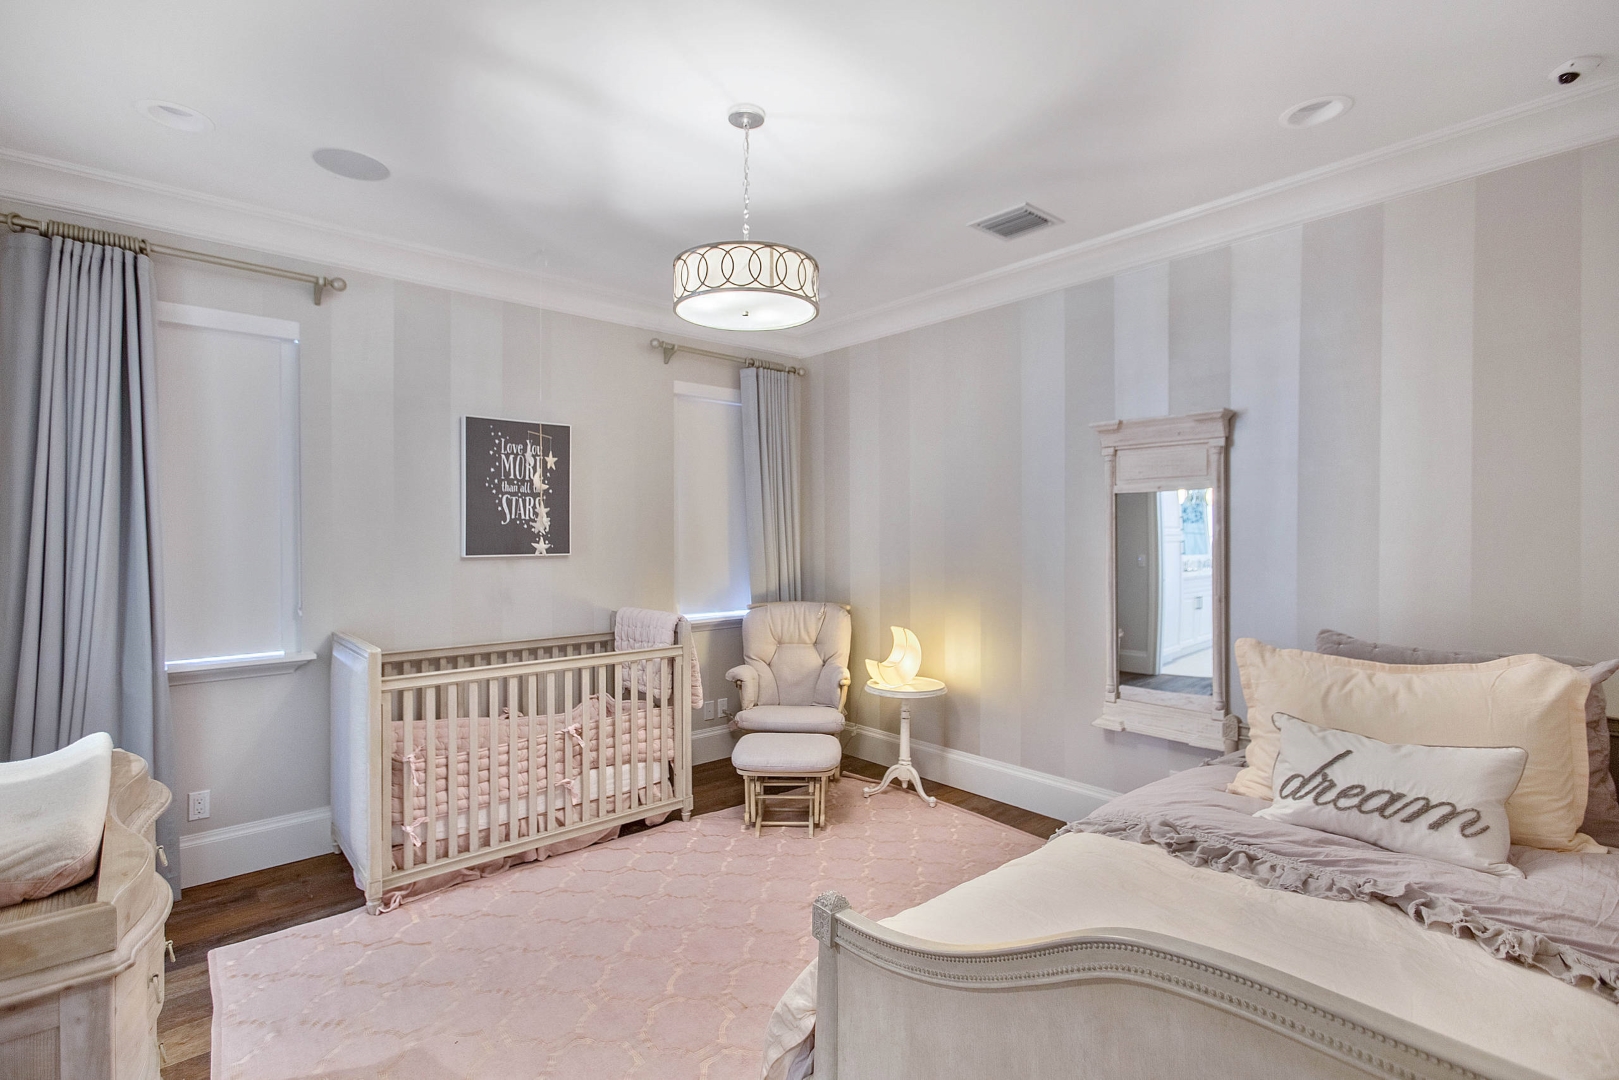 15 Traditional Nursery Designs for Timeless Baby Comfort